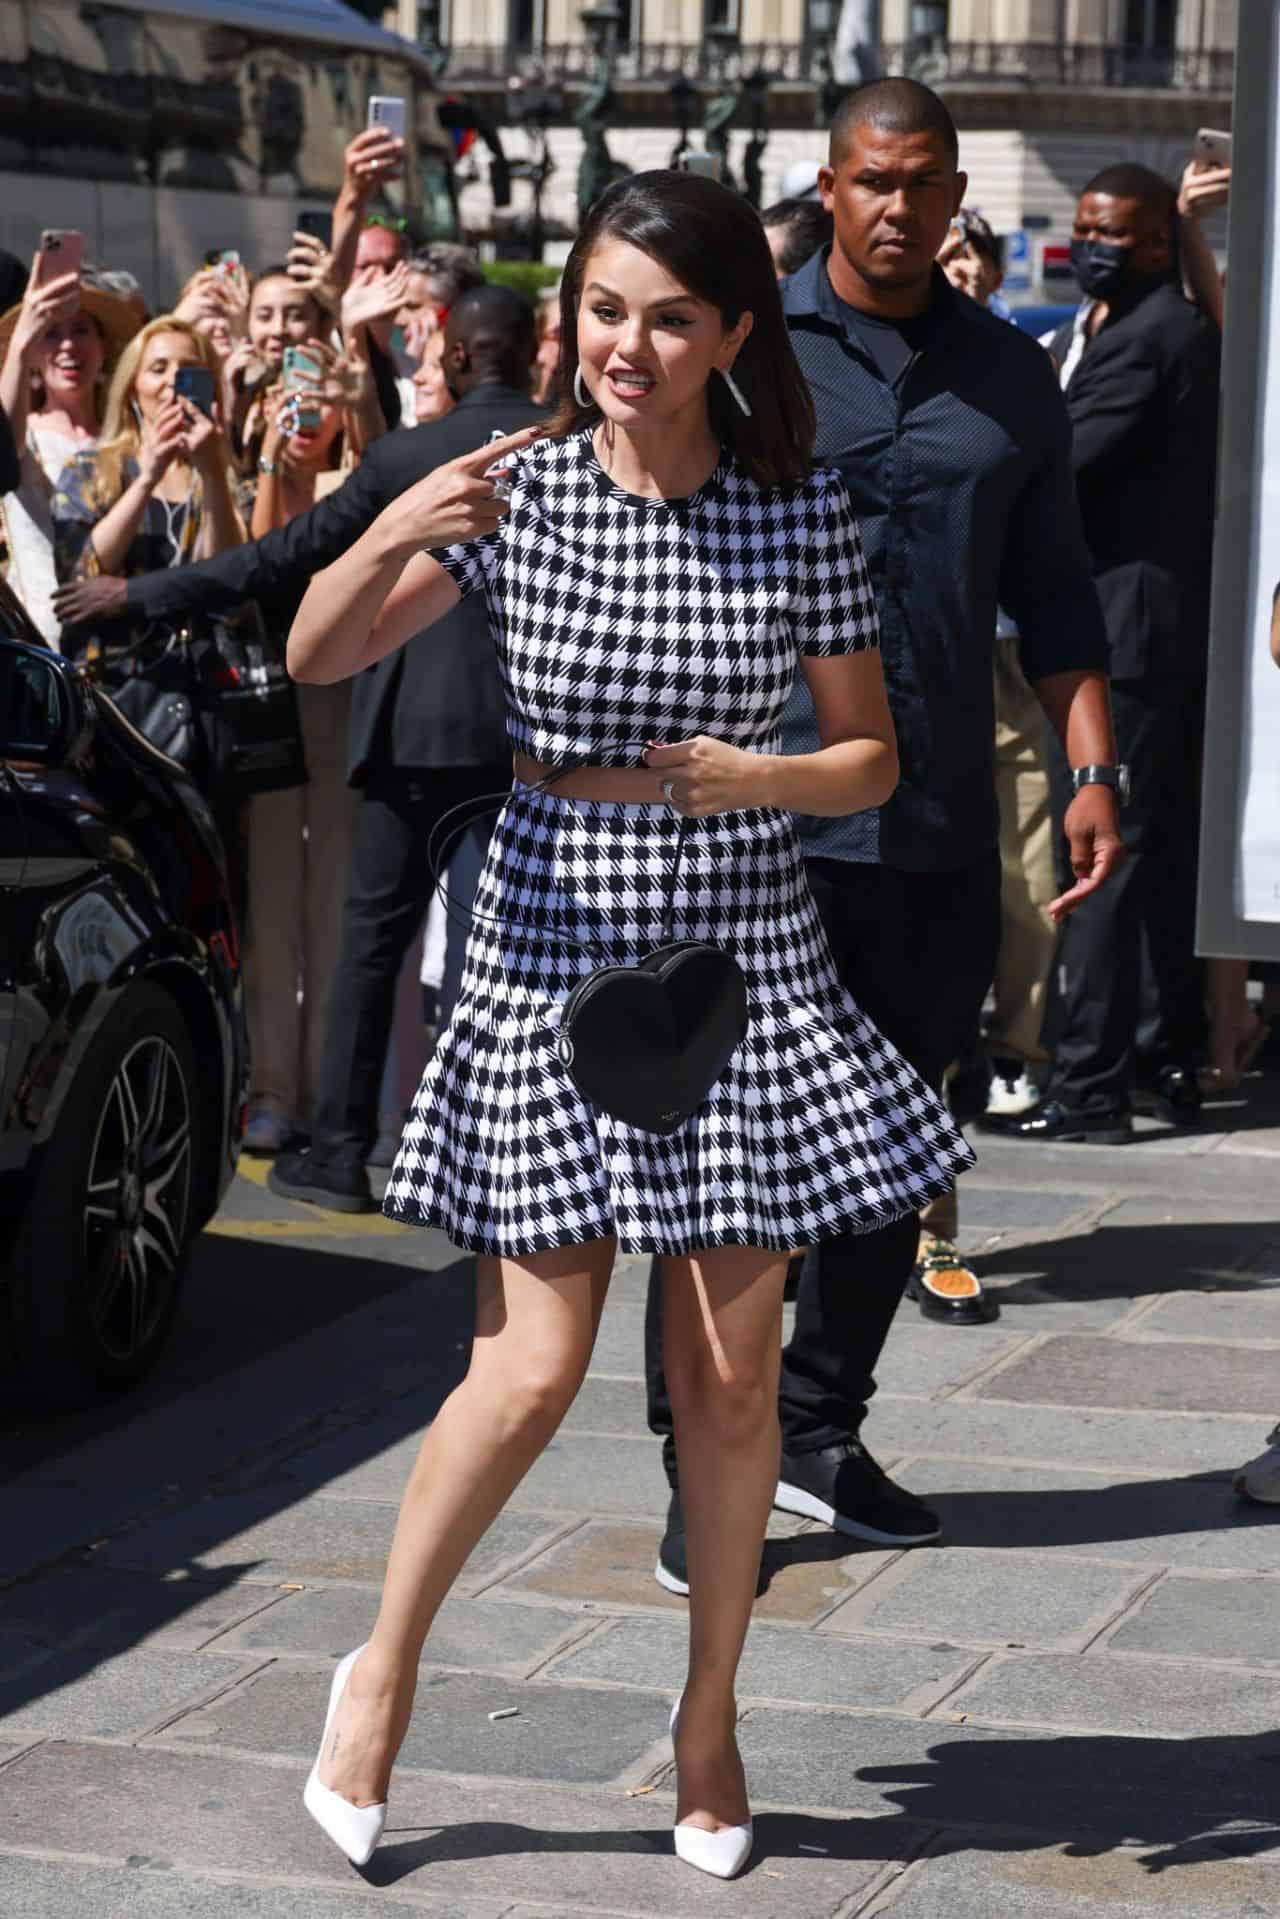 Selena Gomez Shines in a Matching Black and White Checkered Set in Paris